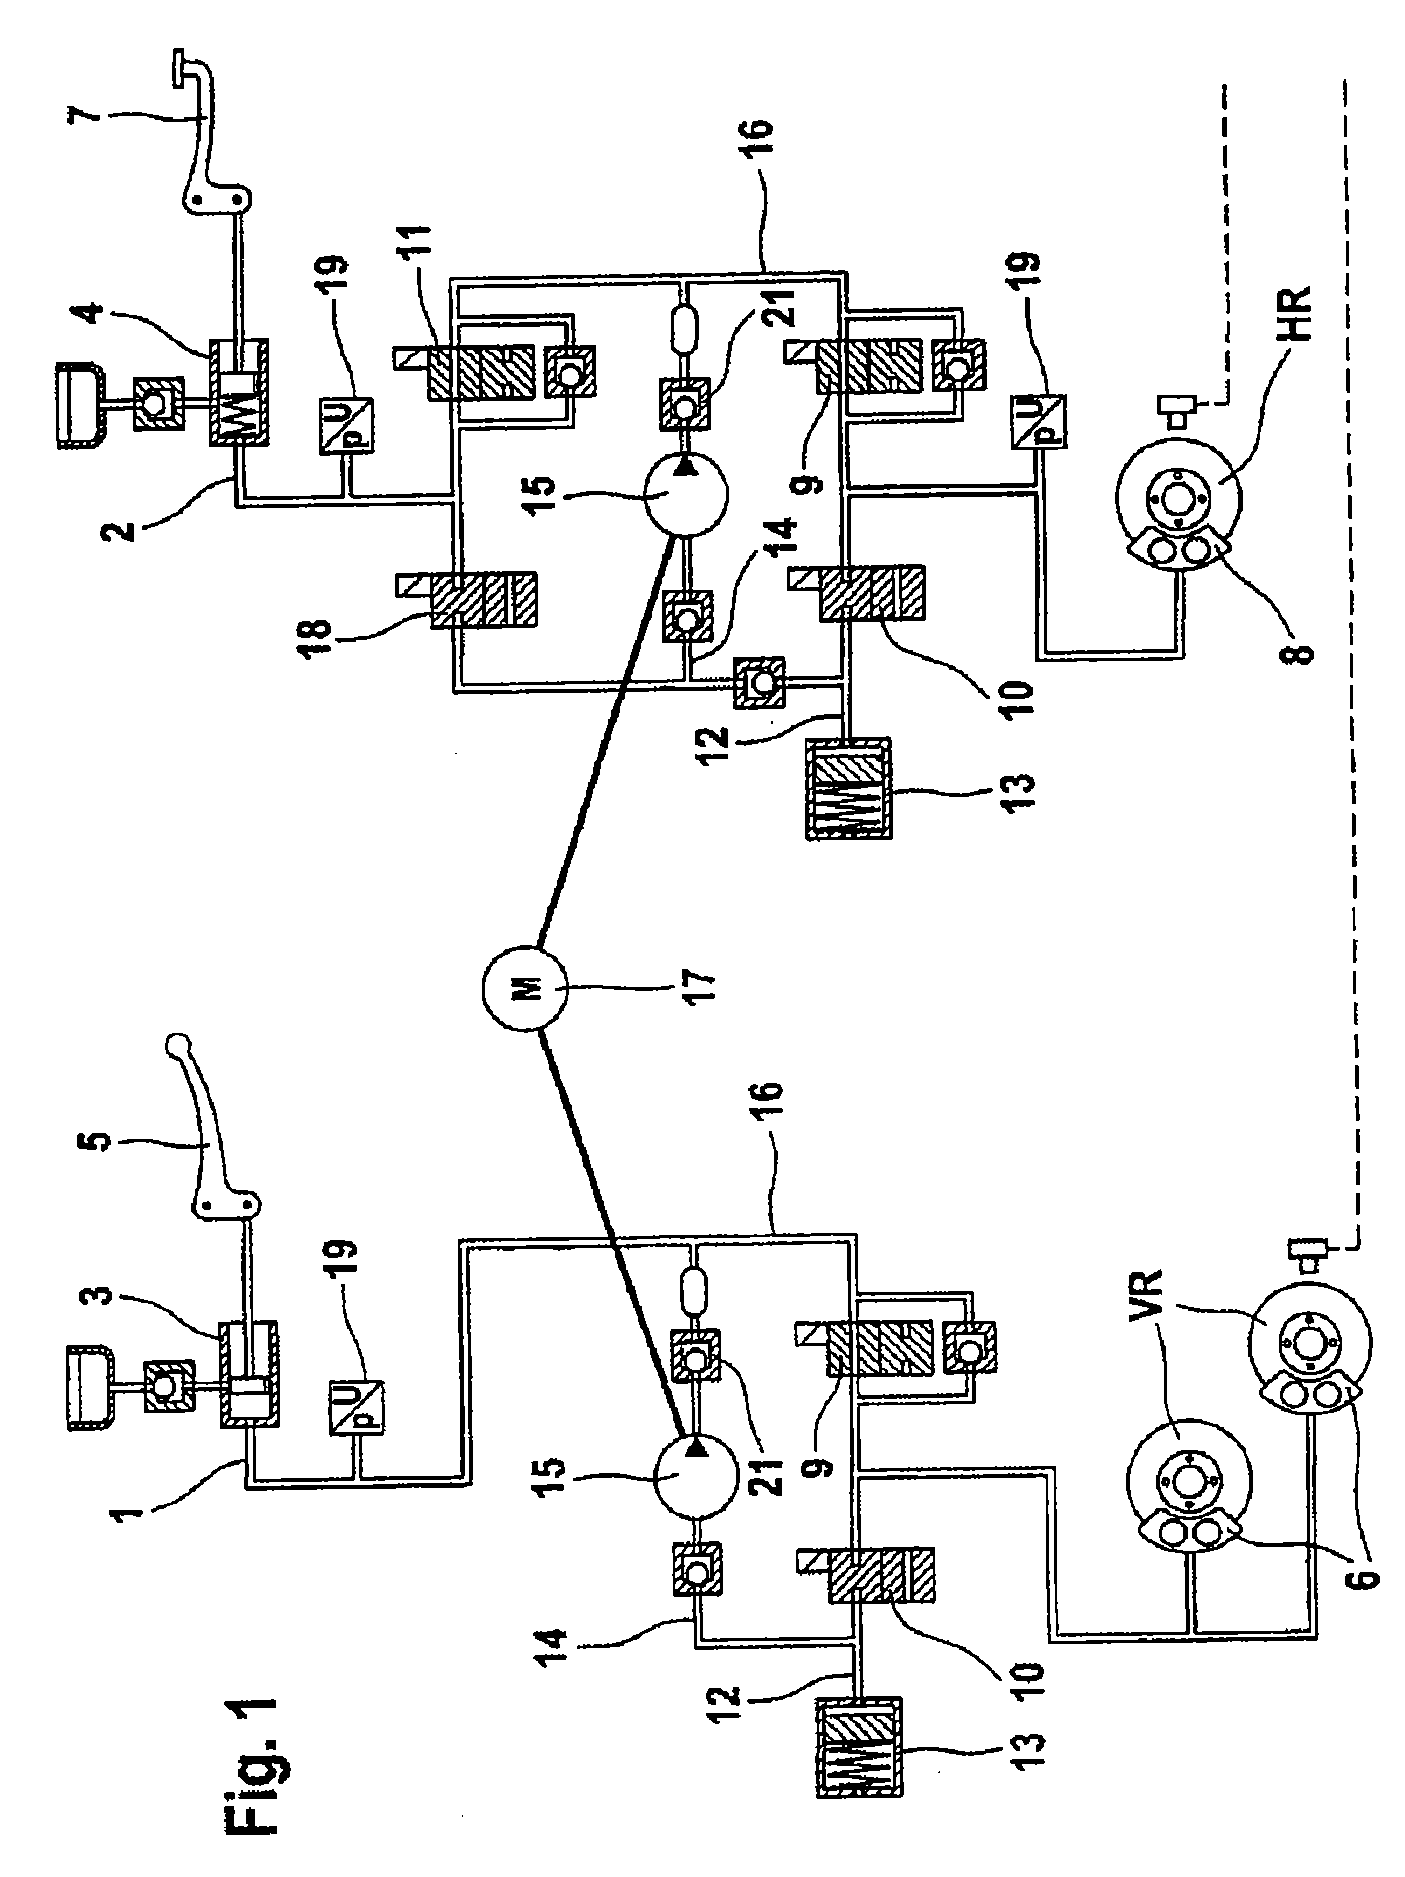 Method for Regulating The Pressure In An Electronically Controlled Brake System, and Electronic Brake System